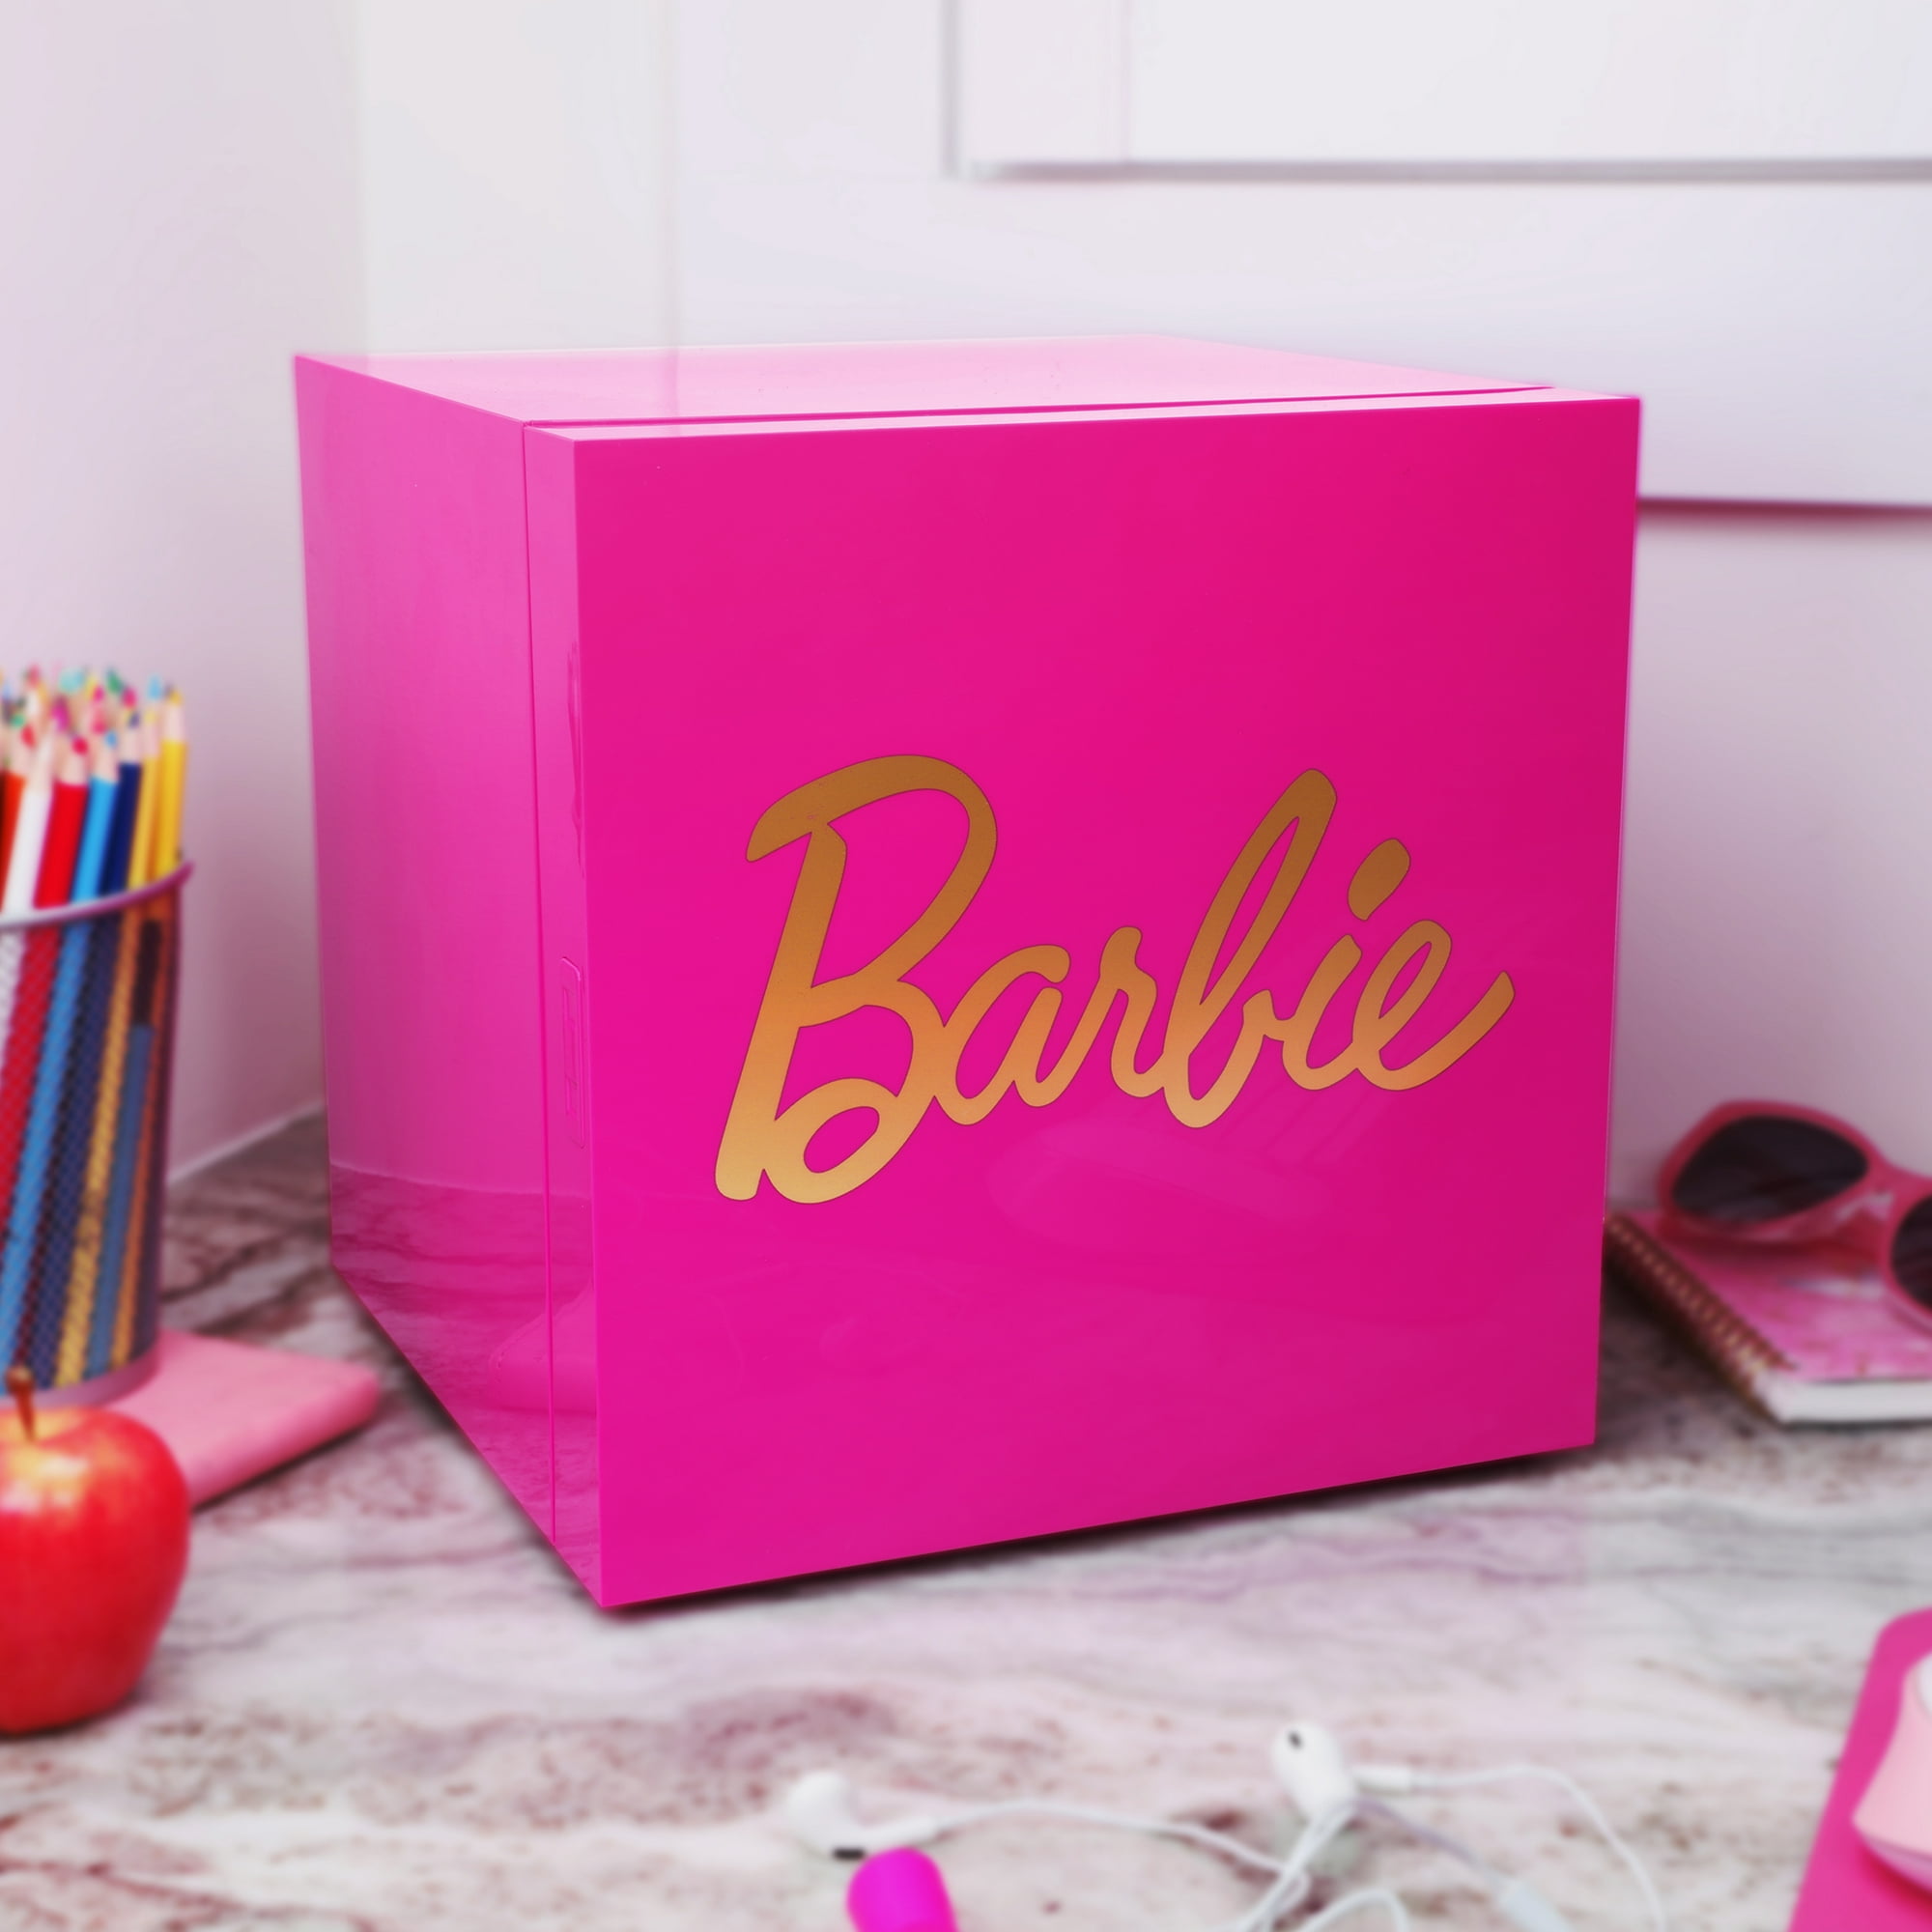 Barbie's Dreamhouse gets a makeover for 2023 - Good Morning America